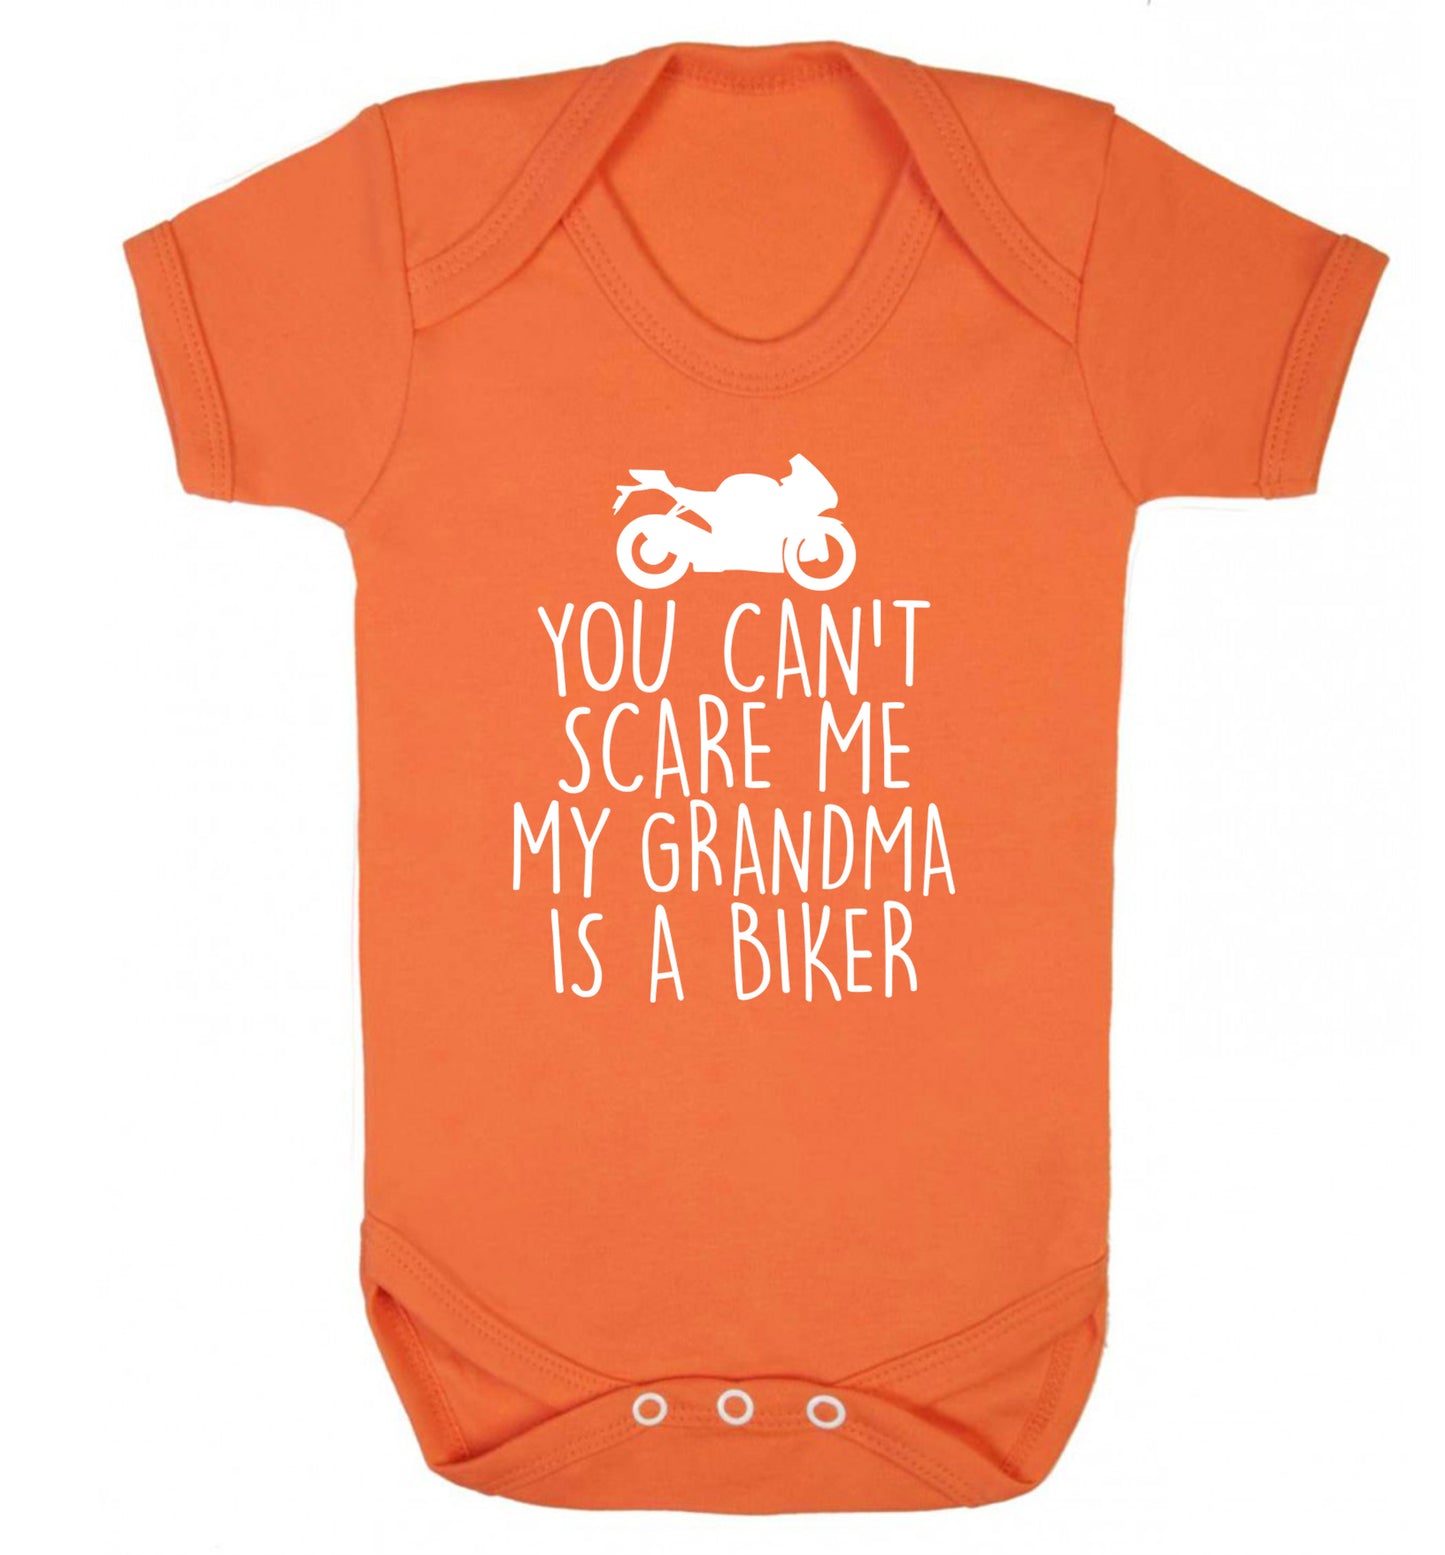 You can't scare me my grandma is a biker Baby Vest orange 18-24 months